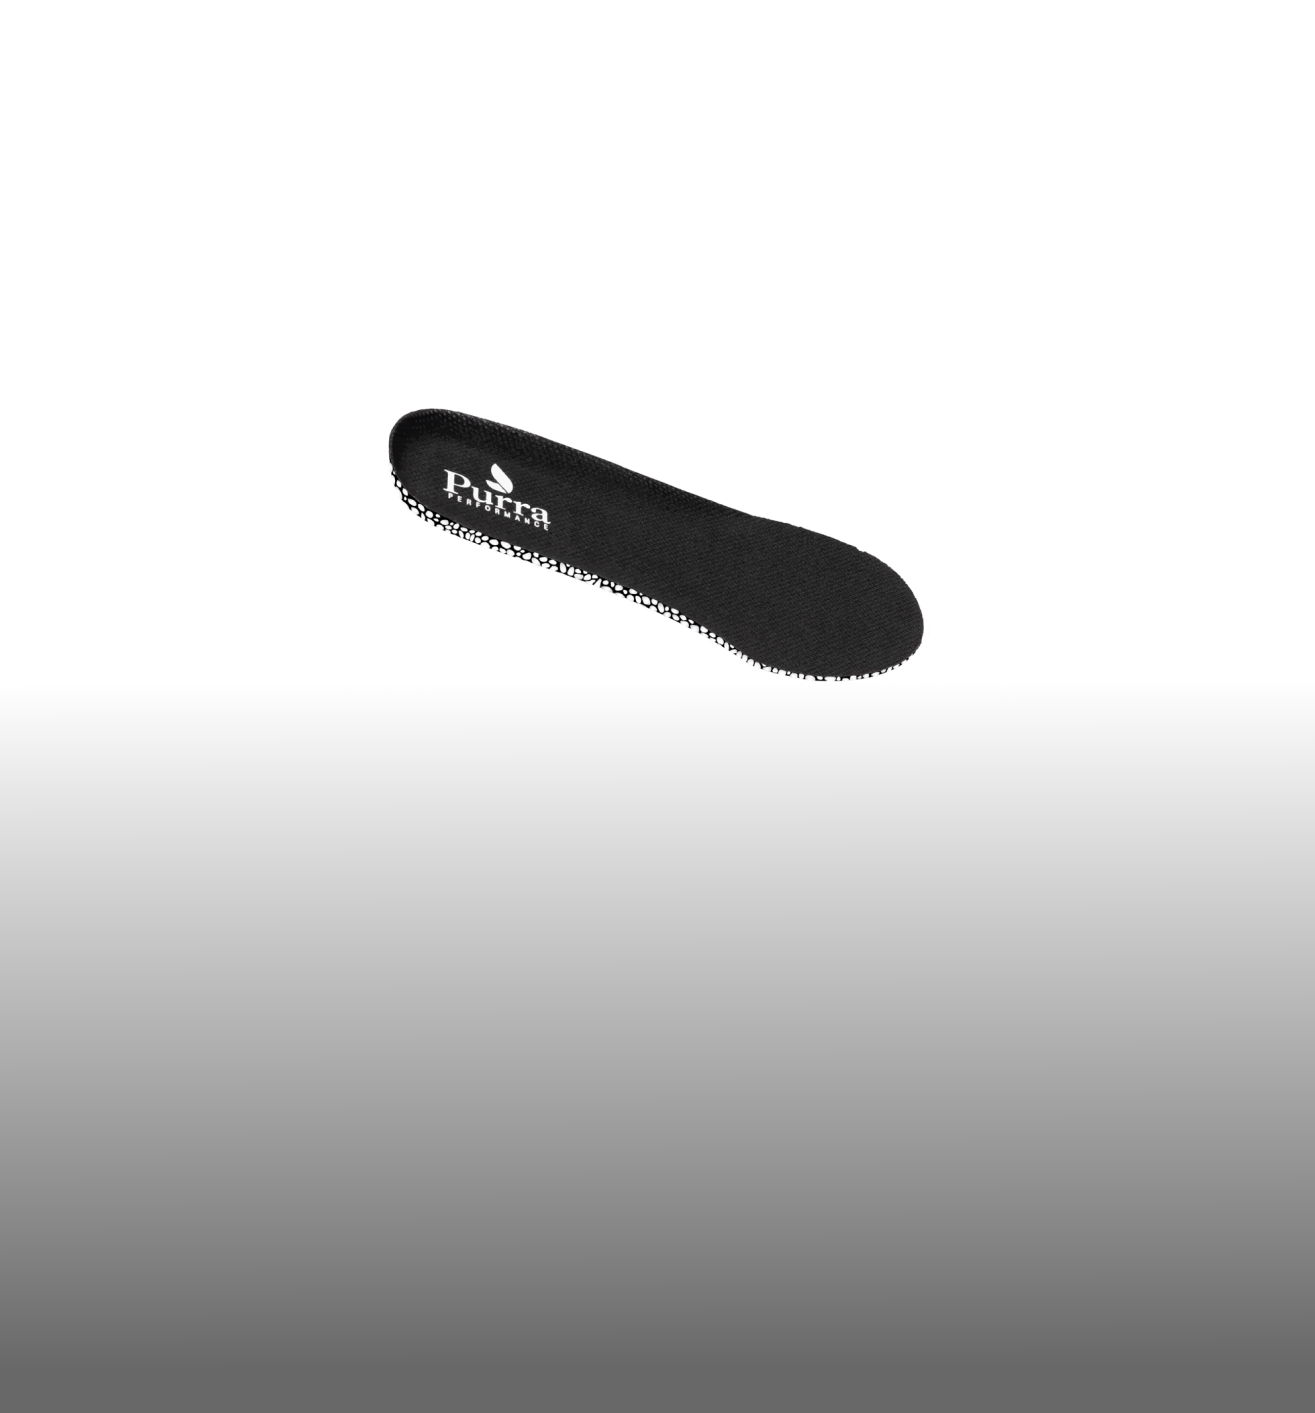 The eTPU high impact insole - black upper and black and white dotted lower shown on a gradiated white to pale grey background. The Purra logo is shown on the heel area.